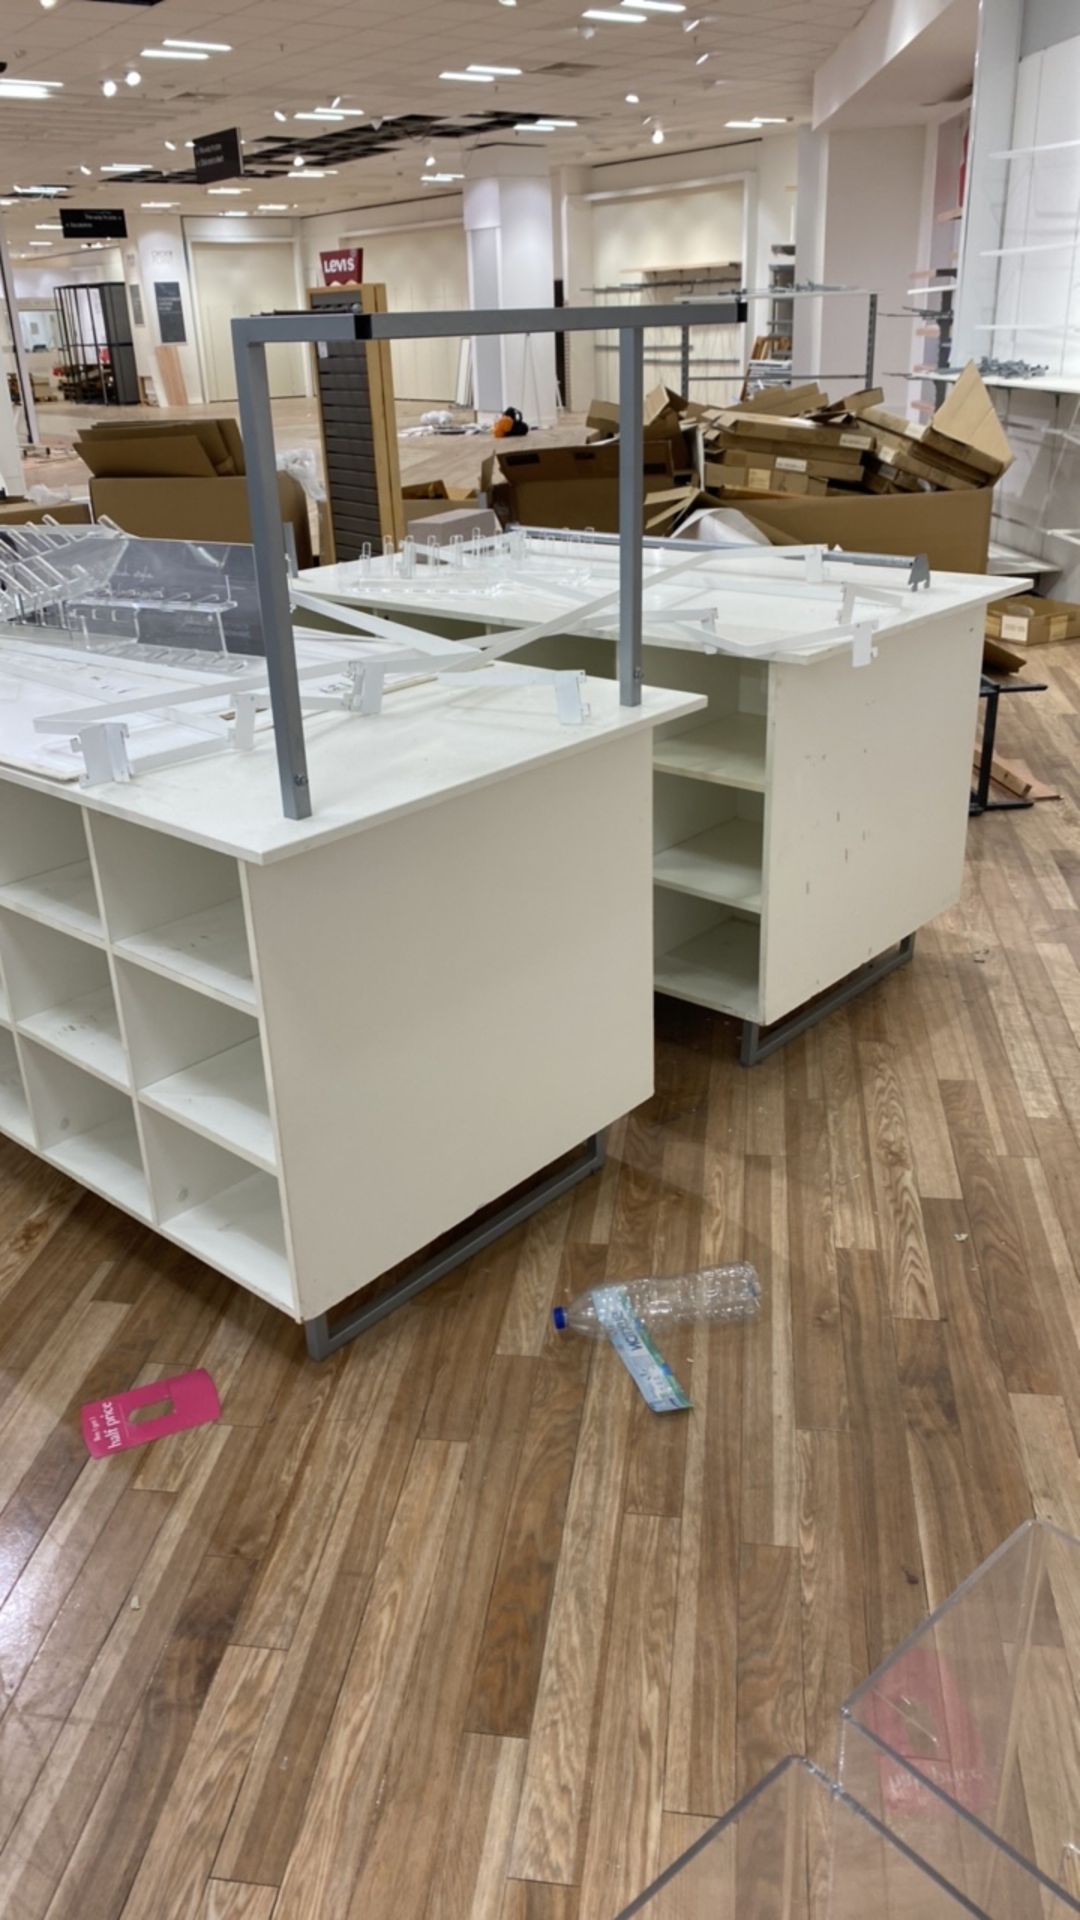 2x Retail Display White Wooden Cabinets - Image 3 of 4